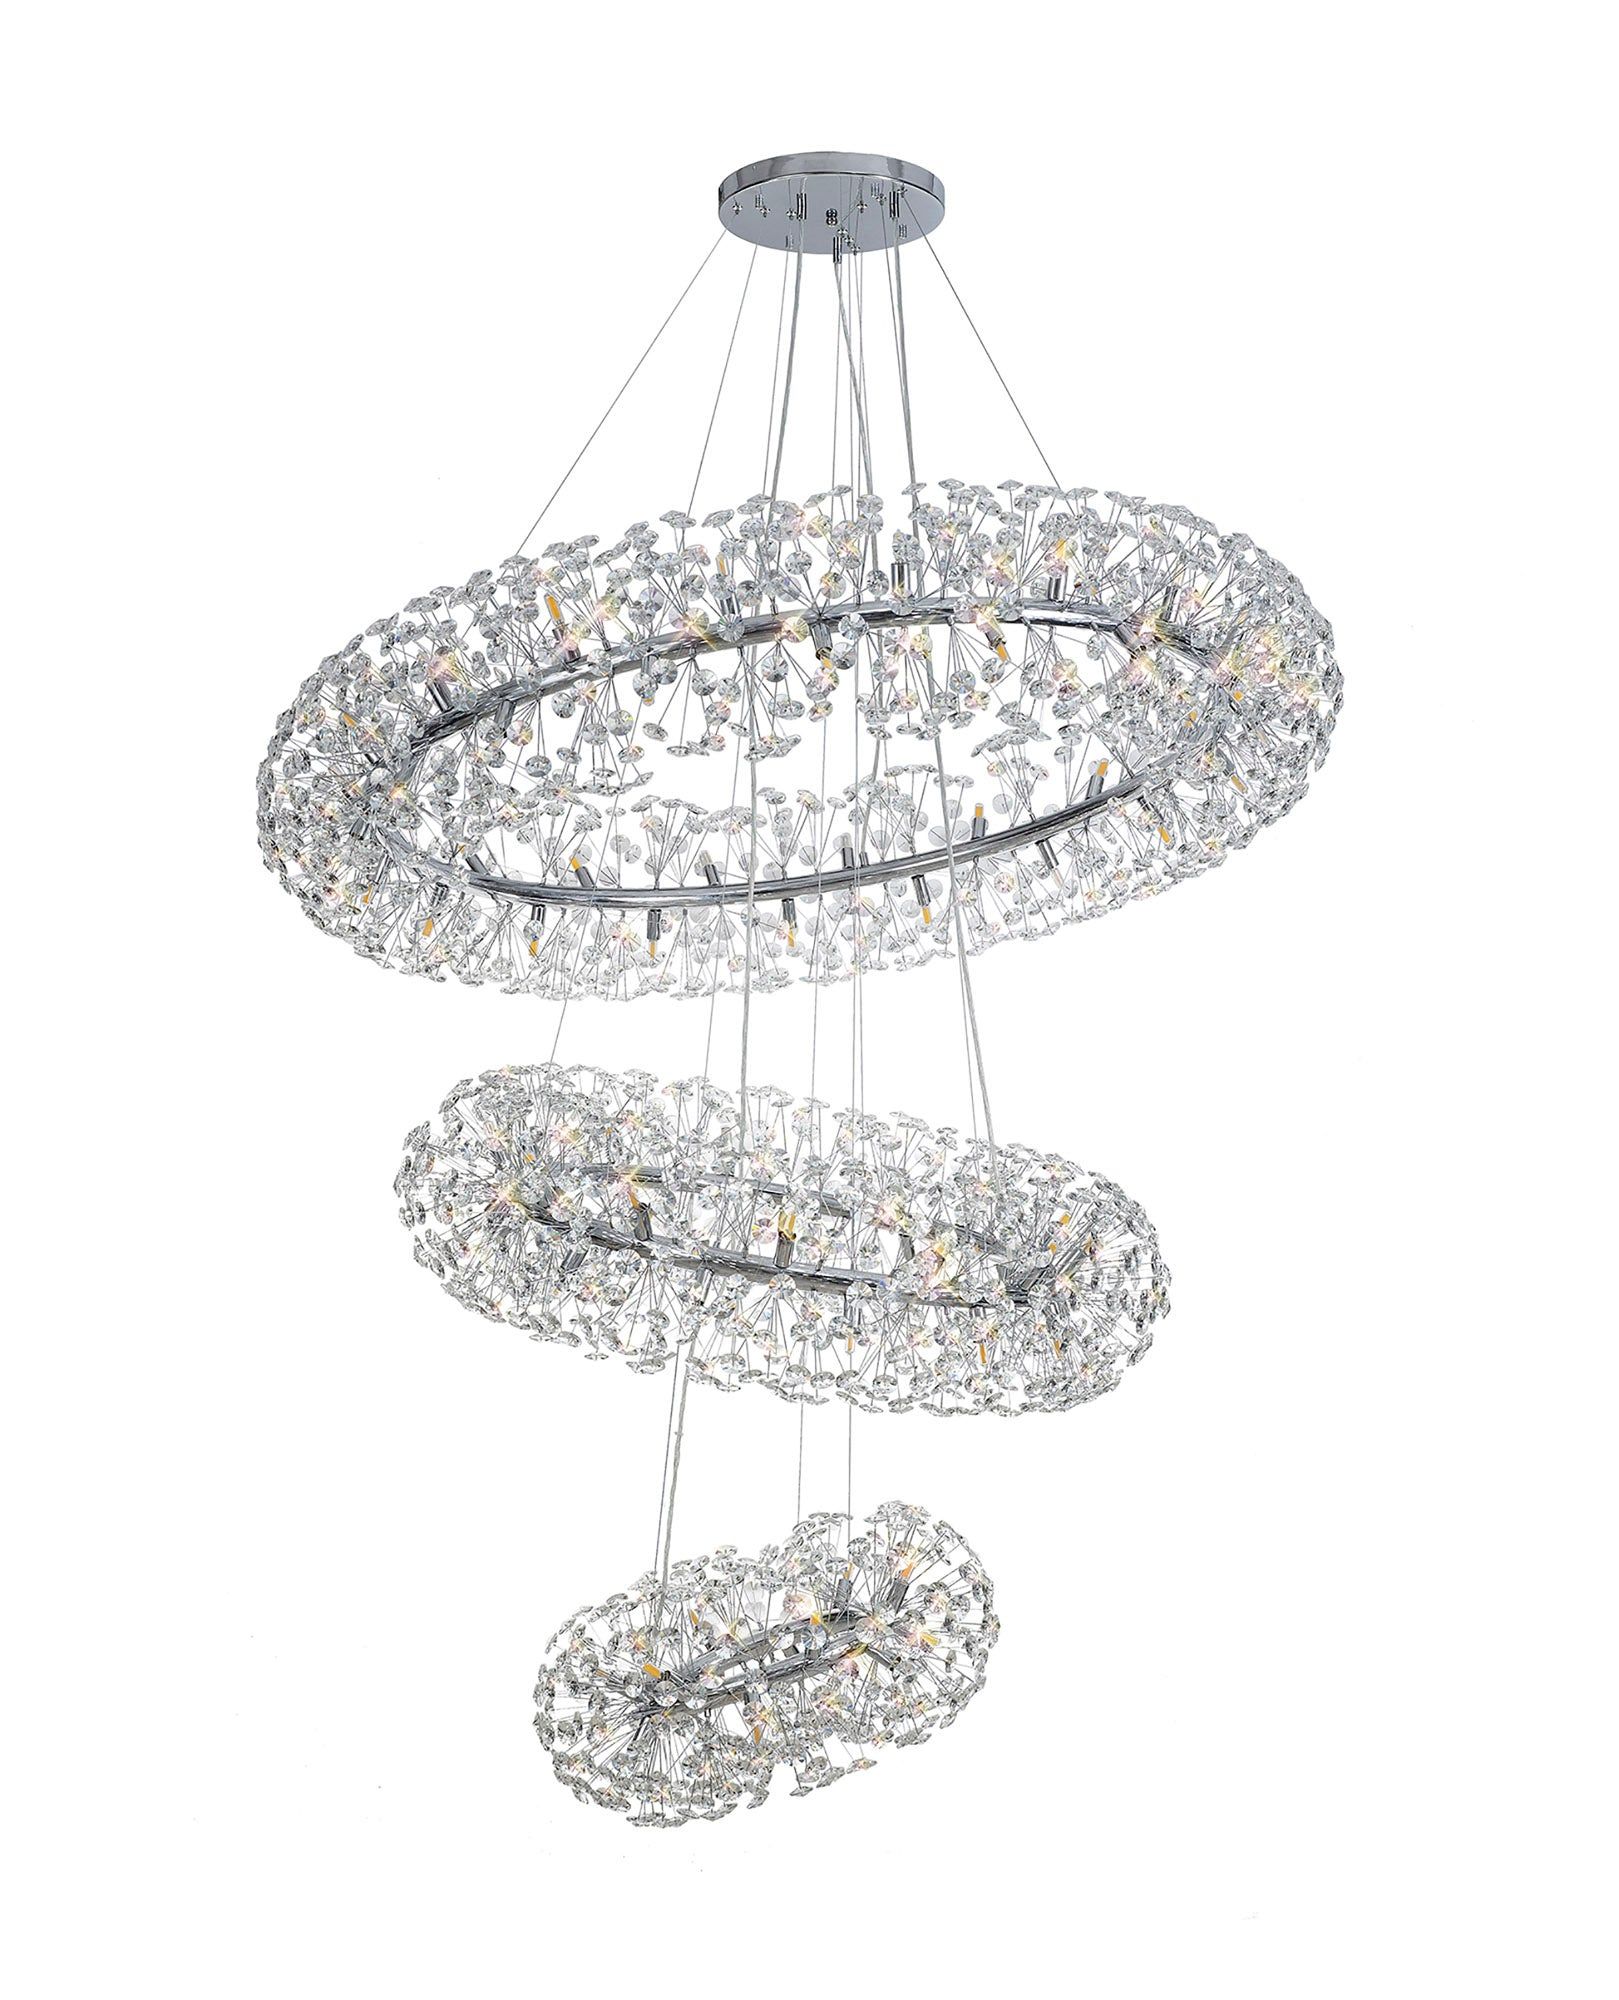 Sophia 3 Tier Pendant 74 Light G9 French Gold/Crystal, Polished Chrome/Crystal, Item Weight: 37.6kg